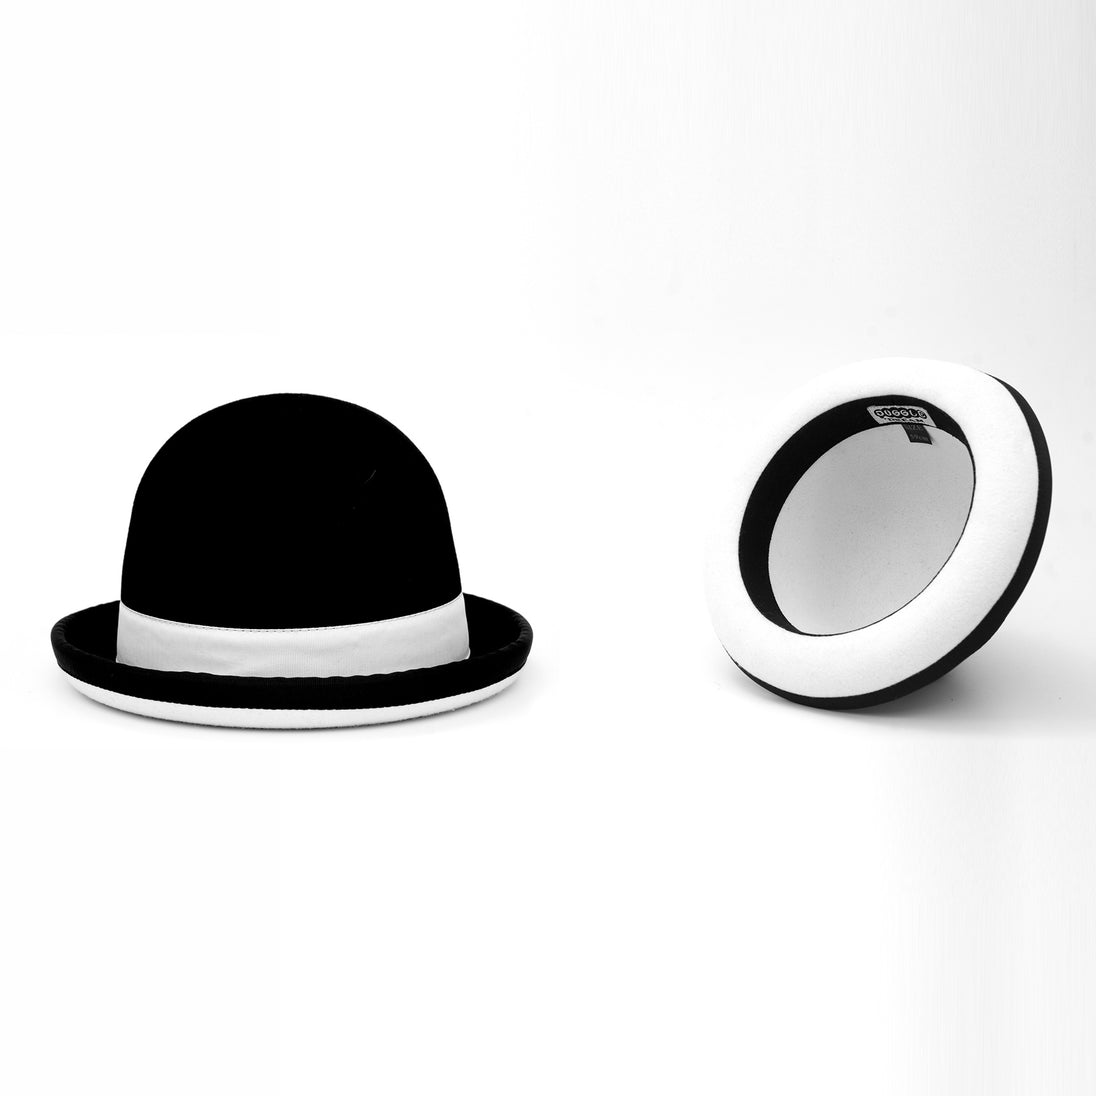 Tumbler Juggling Bowler Hat black with white trim; the side and inside of the hat